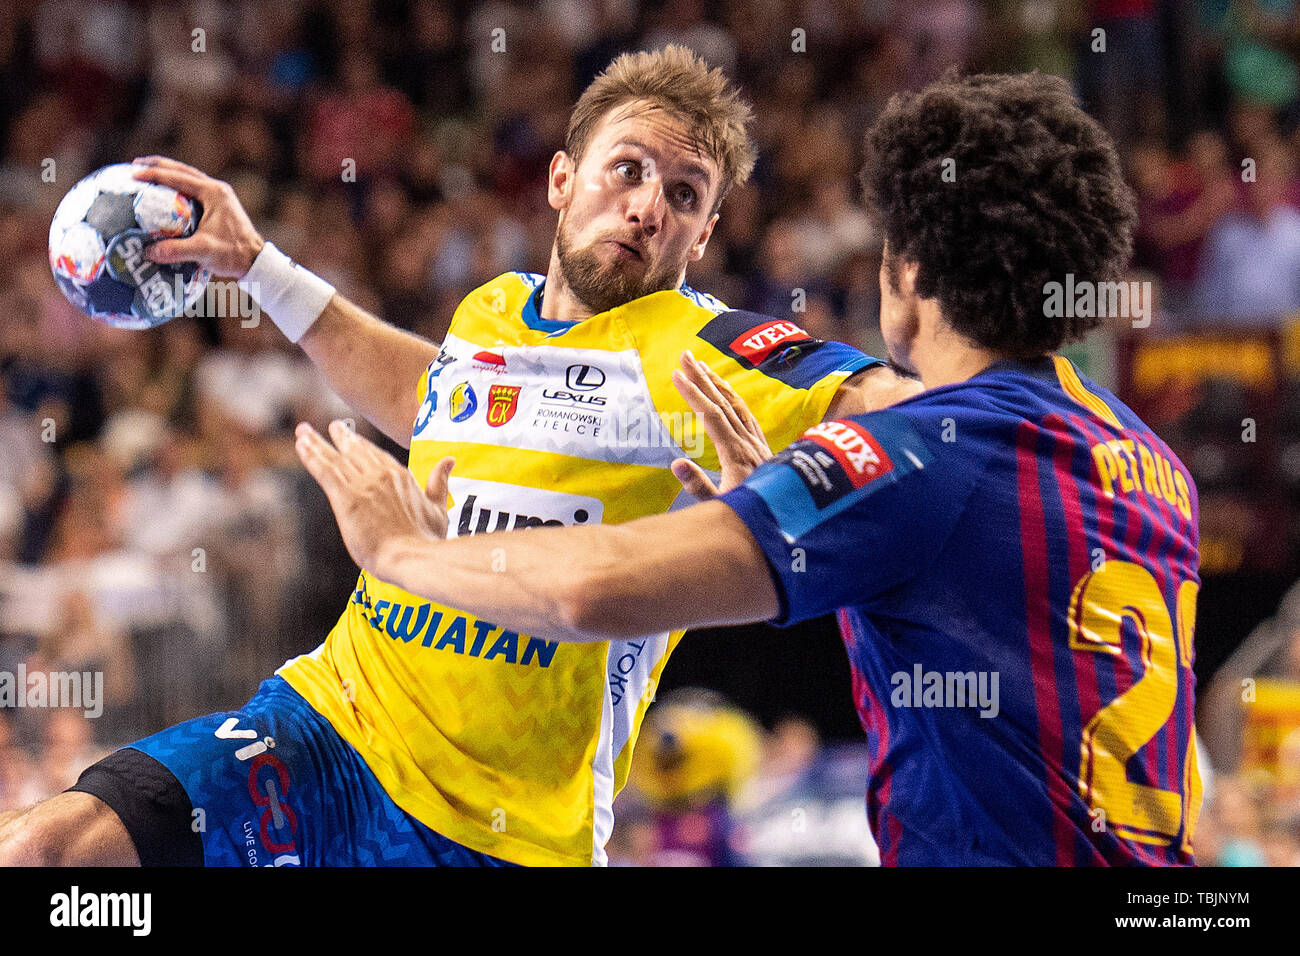 Cologne, Germany. 02nd June, 2019. Handball: Champions League, FC Barcelona  - PGE Vive Kielce, final round, final four, match for 3rd place.  Barcelona's Thiagus Petrus (r) tries to prevent Kielces Luka Cindric